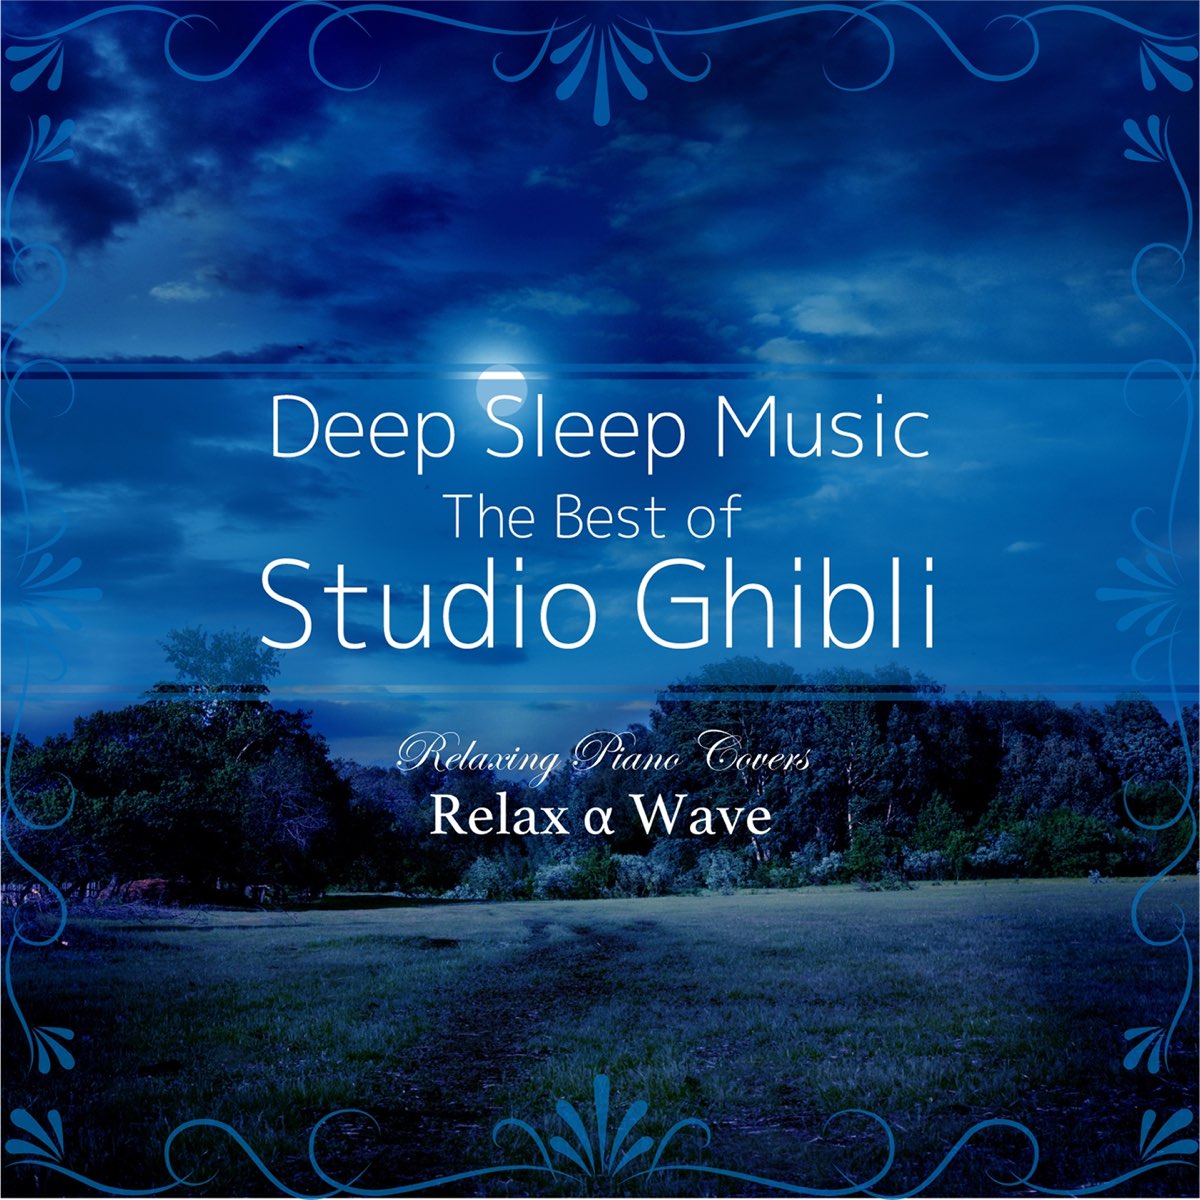 Deep Sleep Music - The Best of Studio Ghibli: Relaxing Piano Covers by Relax  α Wave on Apple Music